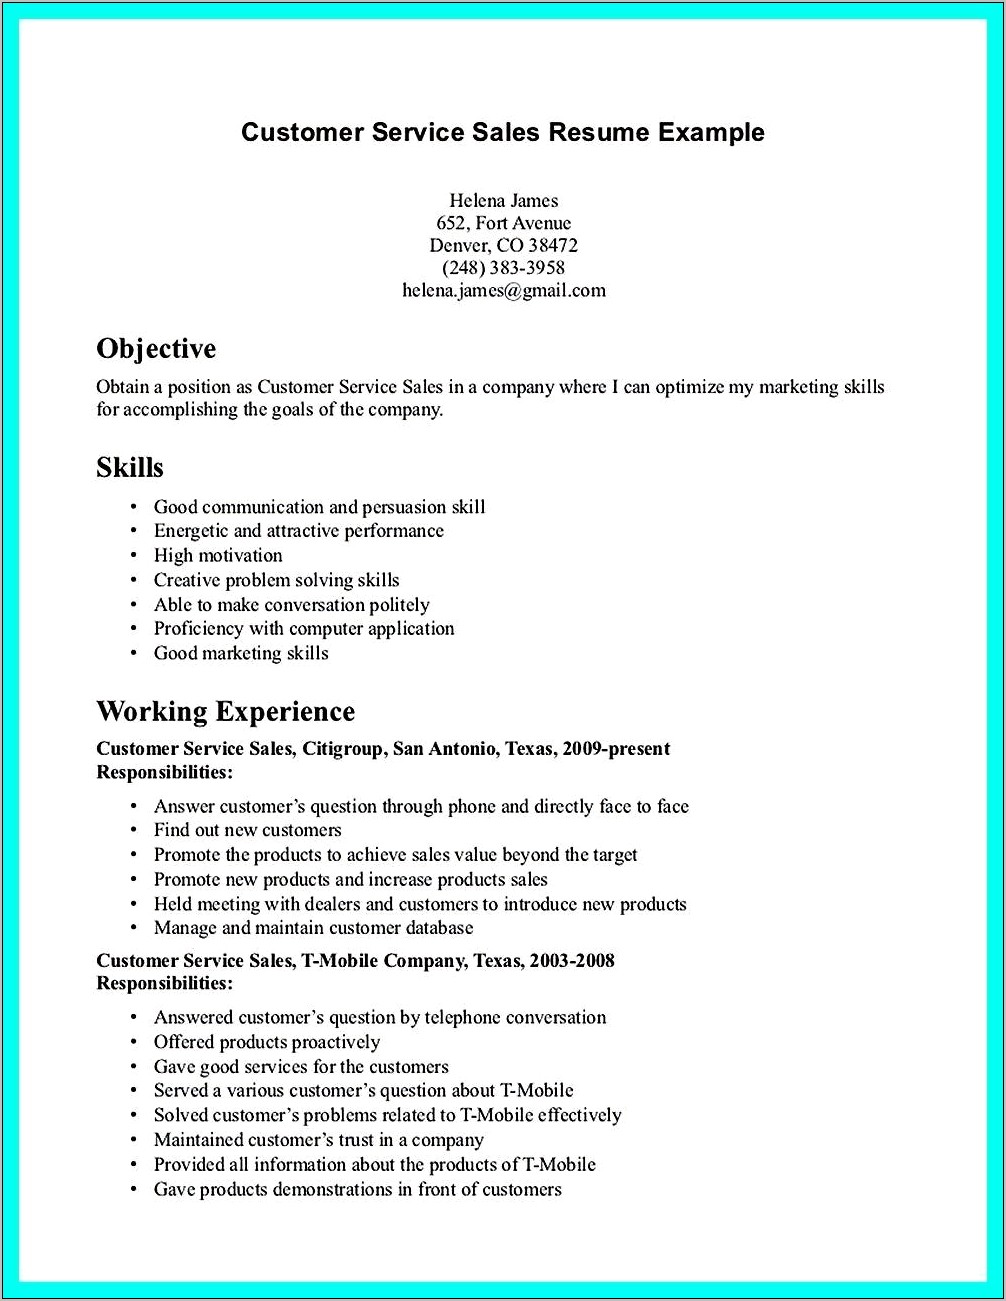 Resume Examples For Entry Level Customer Service